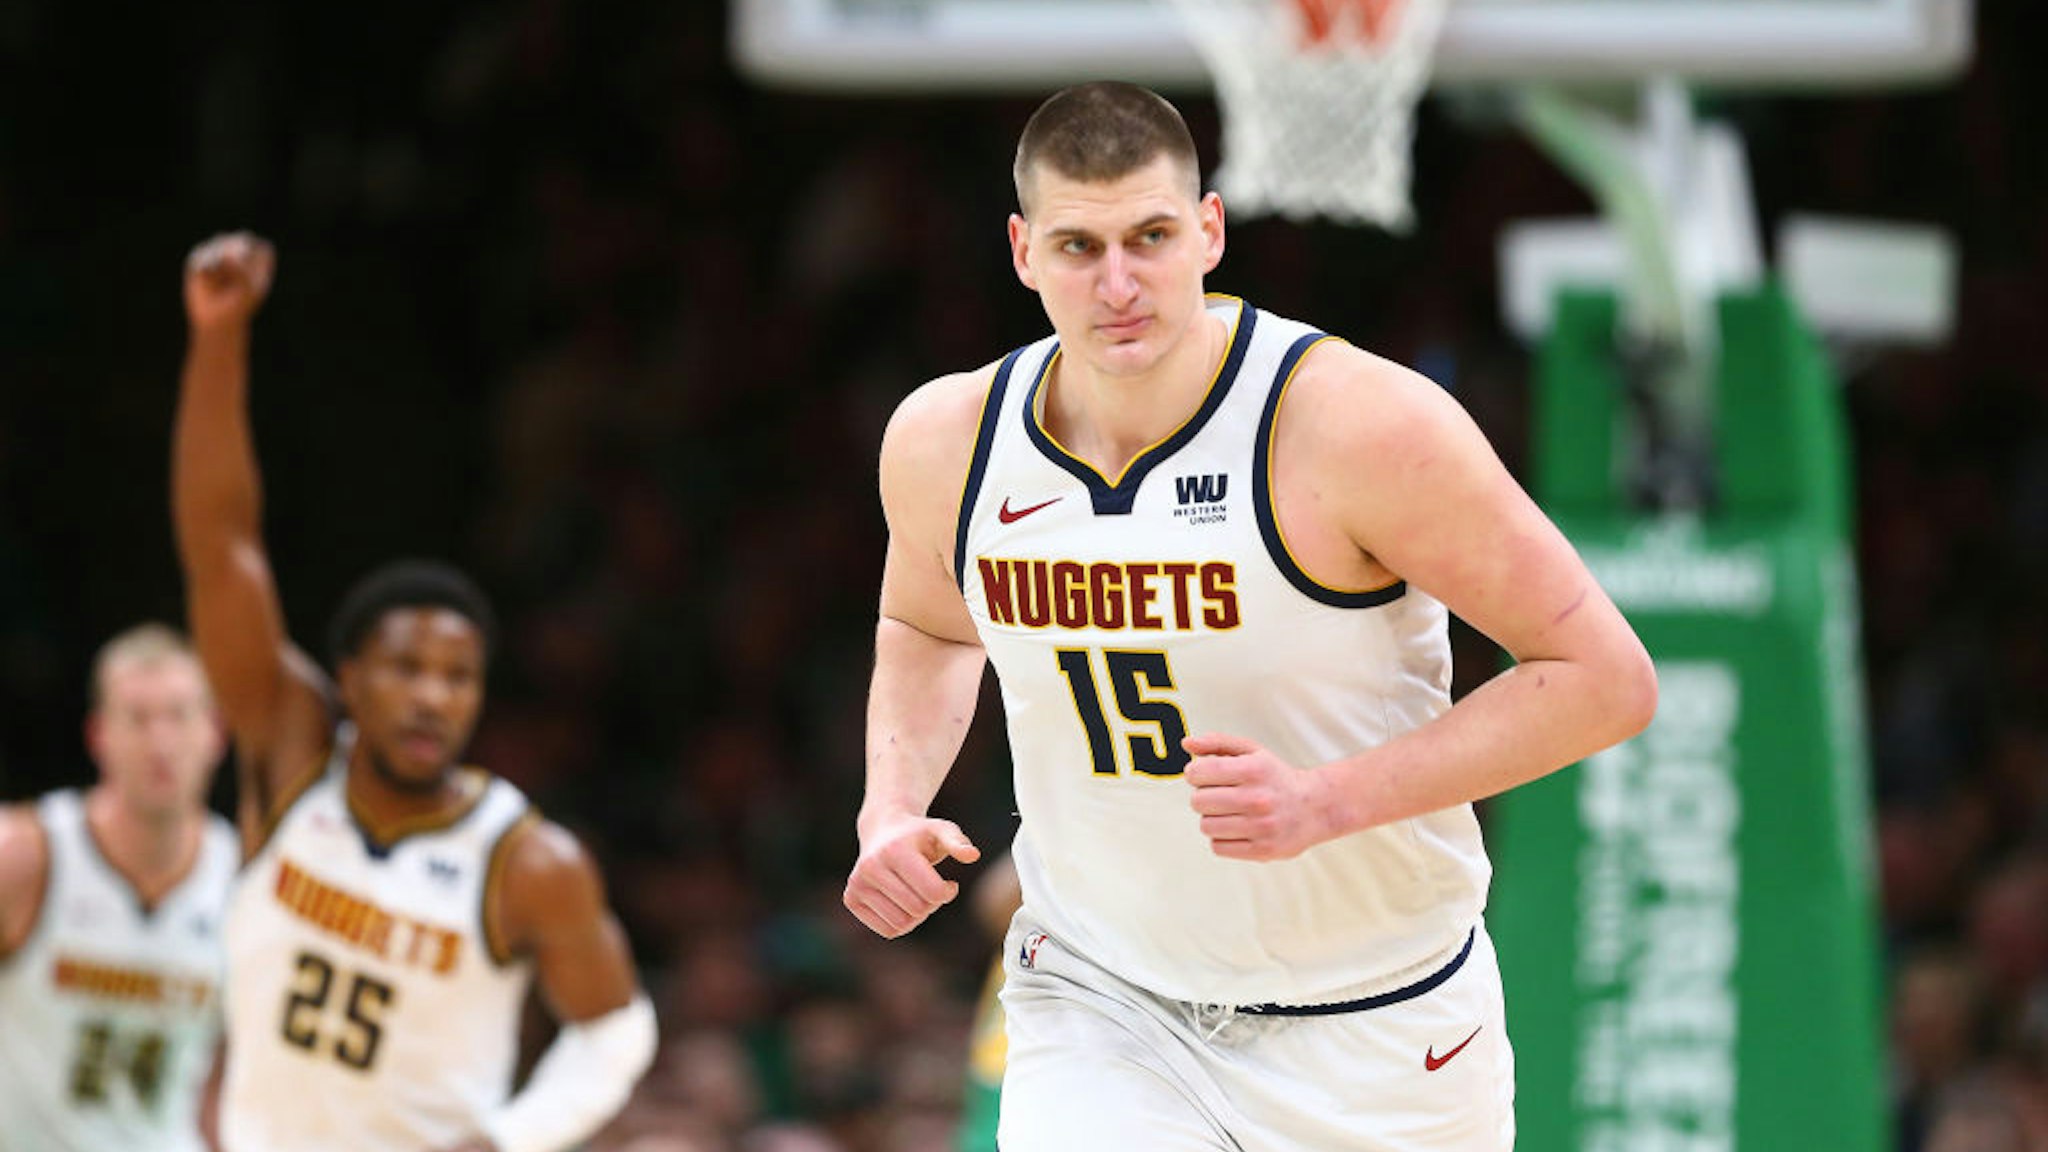 BOSTON, MASSACHUSETTS - MARCH 18: Nikola Jokic #15 of the Denver Nuggets celebrates after scoring against the Boston Celtics during the second half at TD Garden on March 18, 2019 in Boston, Massachusetts. The Nuggets defeat the Celtics 114-105. NOTE TO USER: User expressly acknowledges and agrees that, by downloading and or using this photograph, User is consenting to the terms and conditions of the Getty Images License Agreement. (Photo by Maddie Meyer/Getty Images)